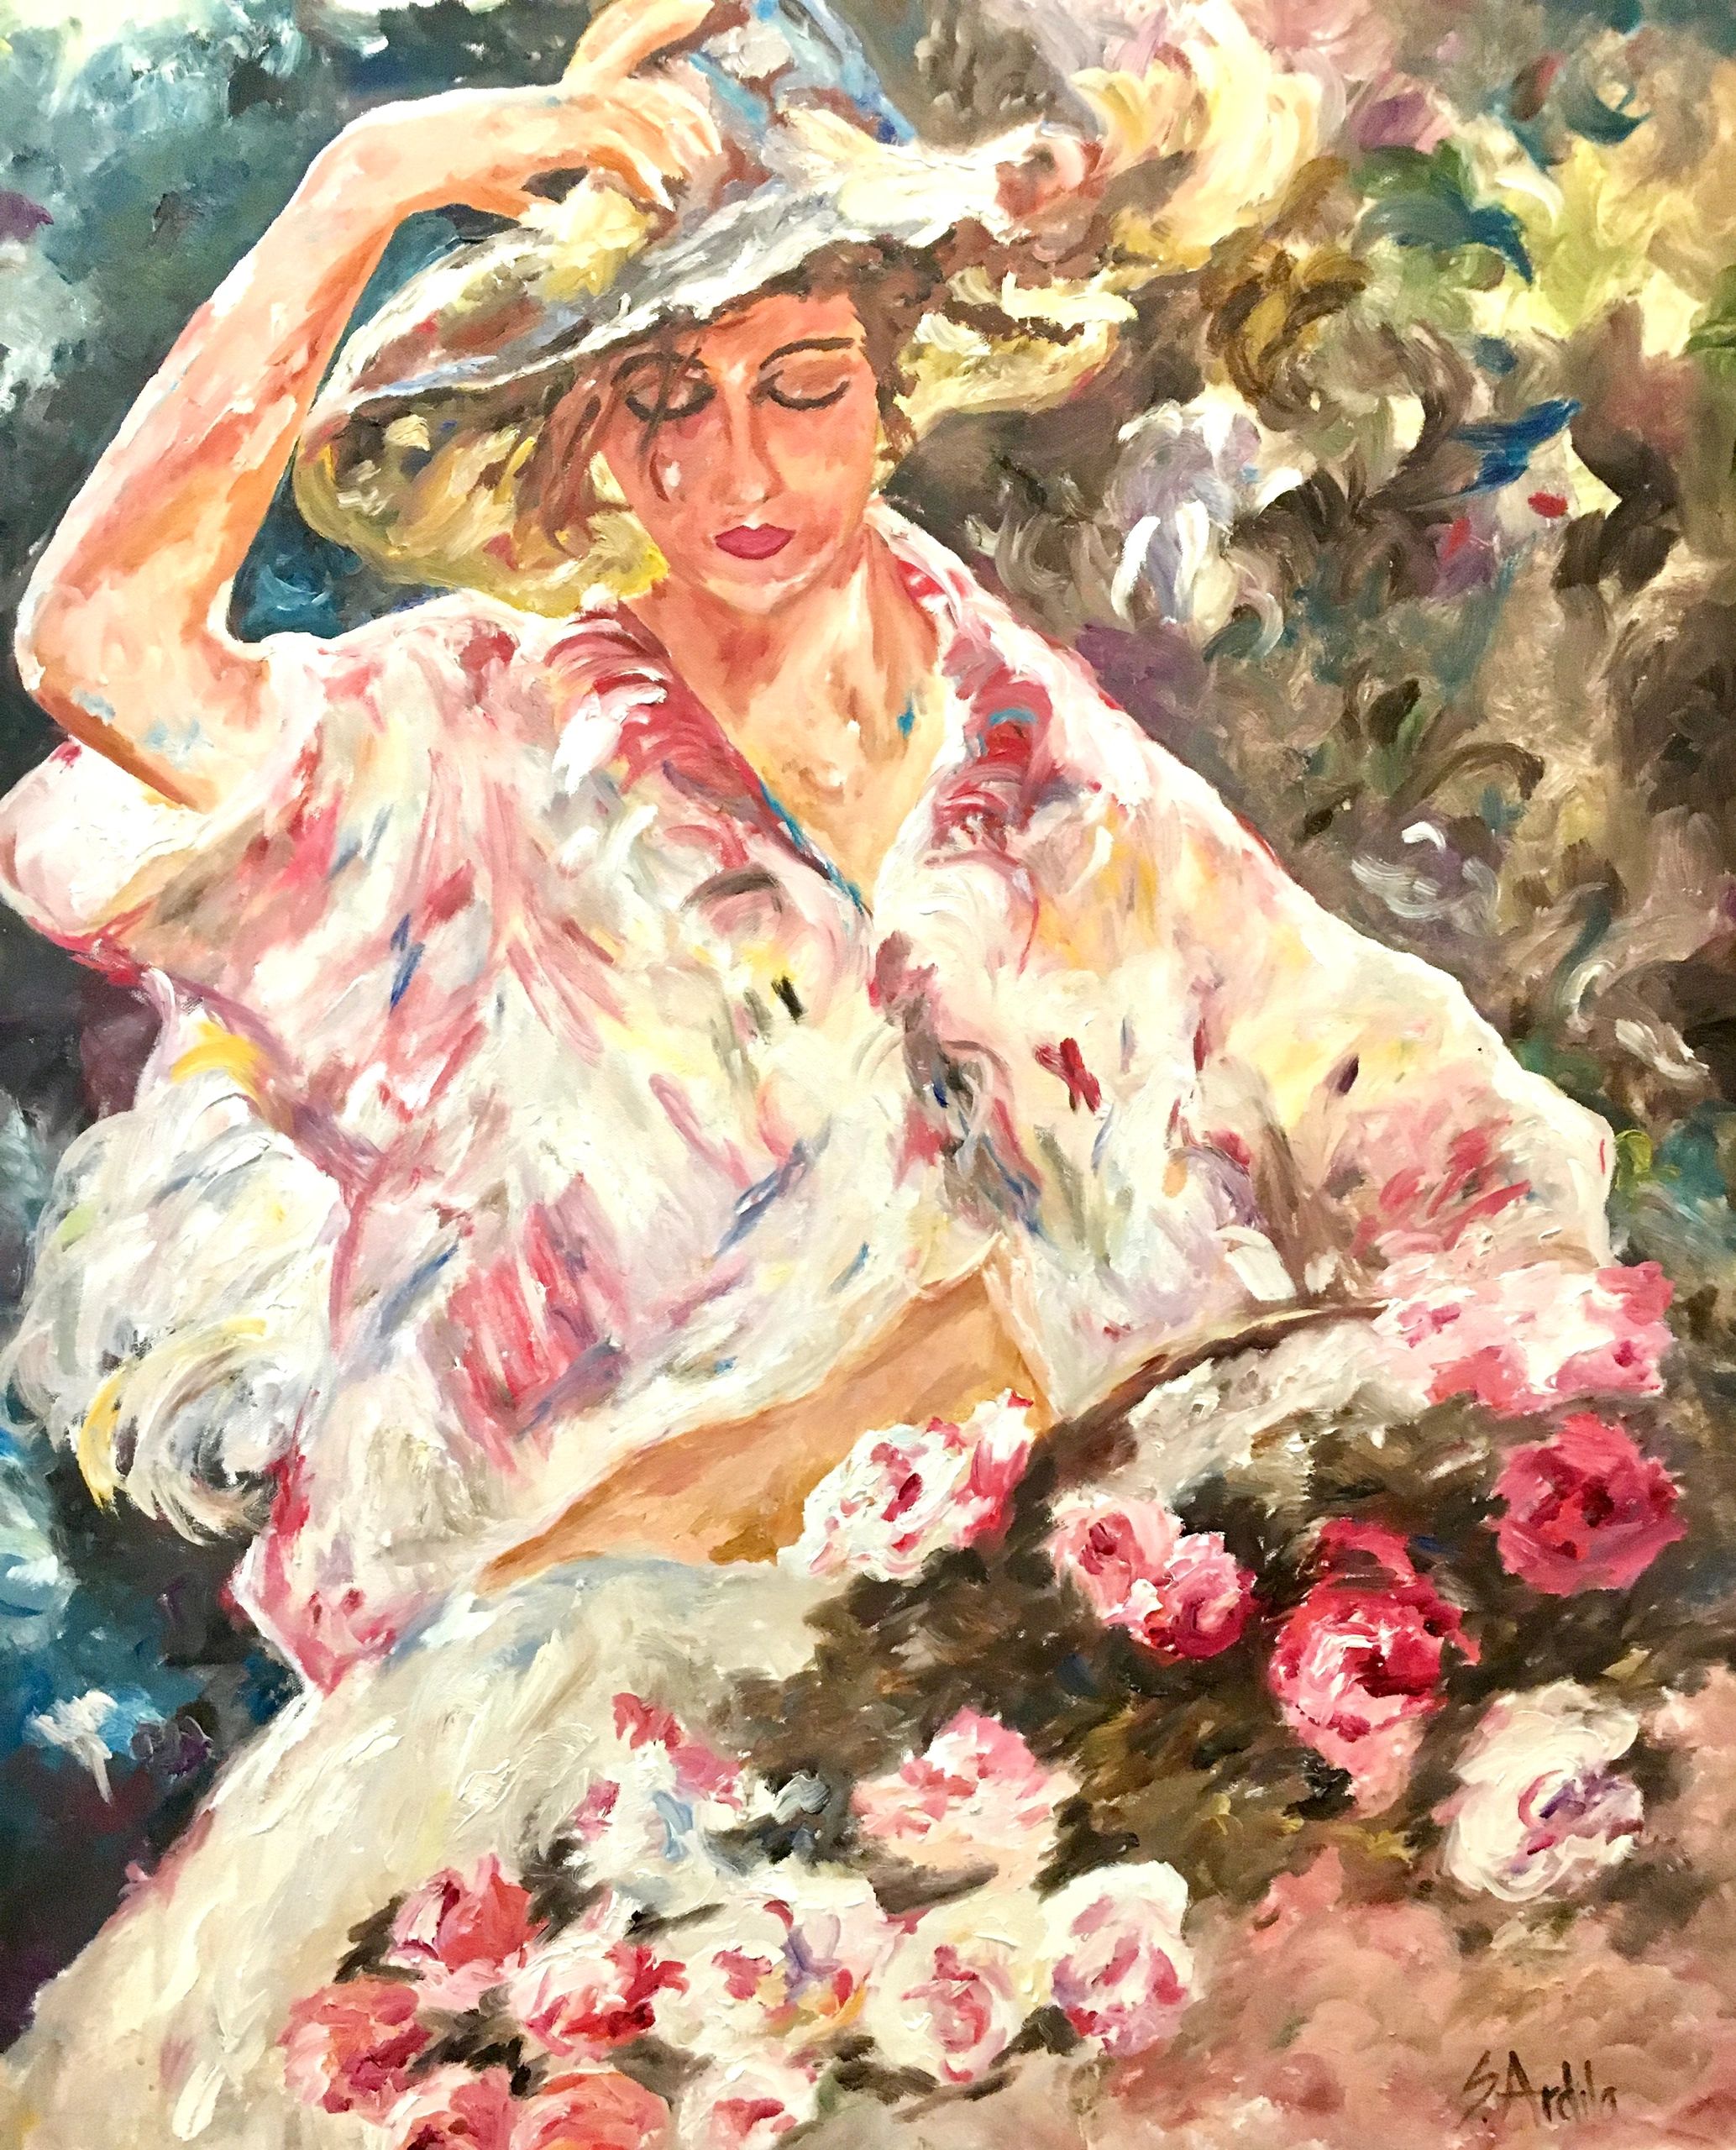 Girl with flowers
Oil on canvas
Palette knife
48" X 36"